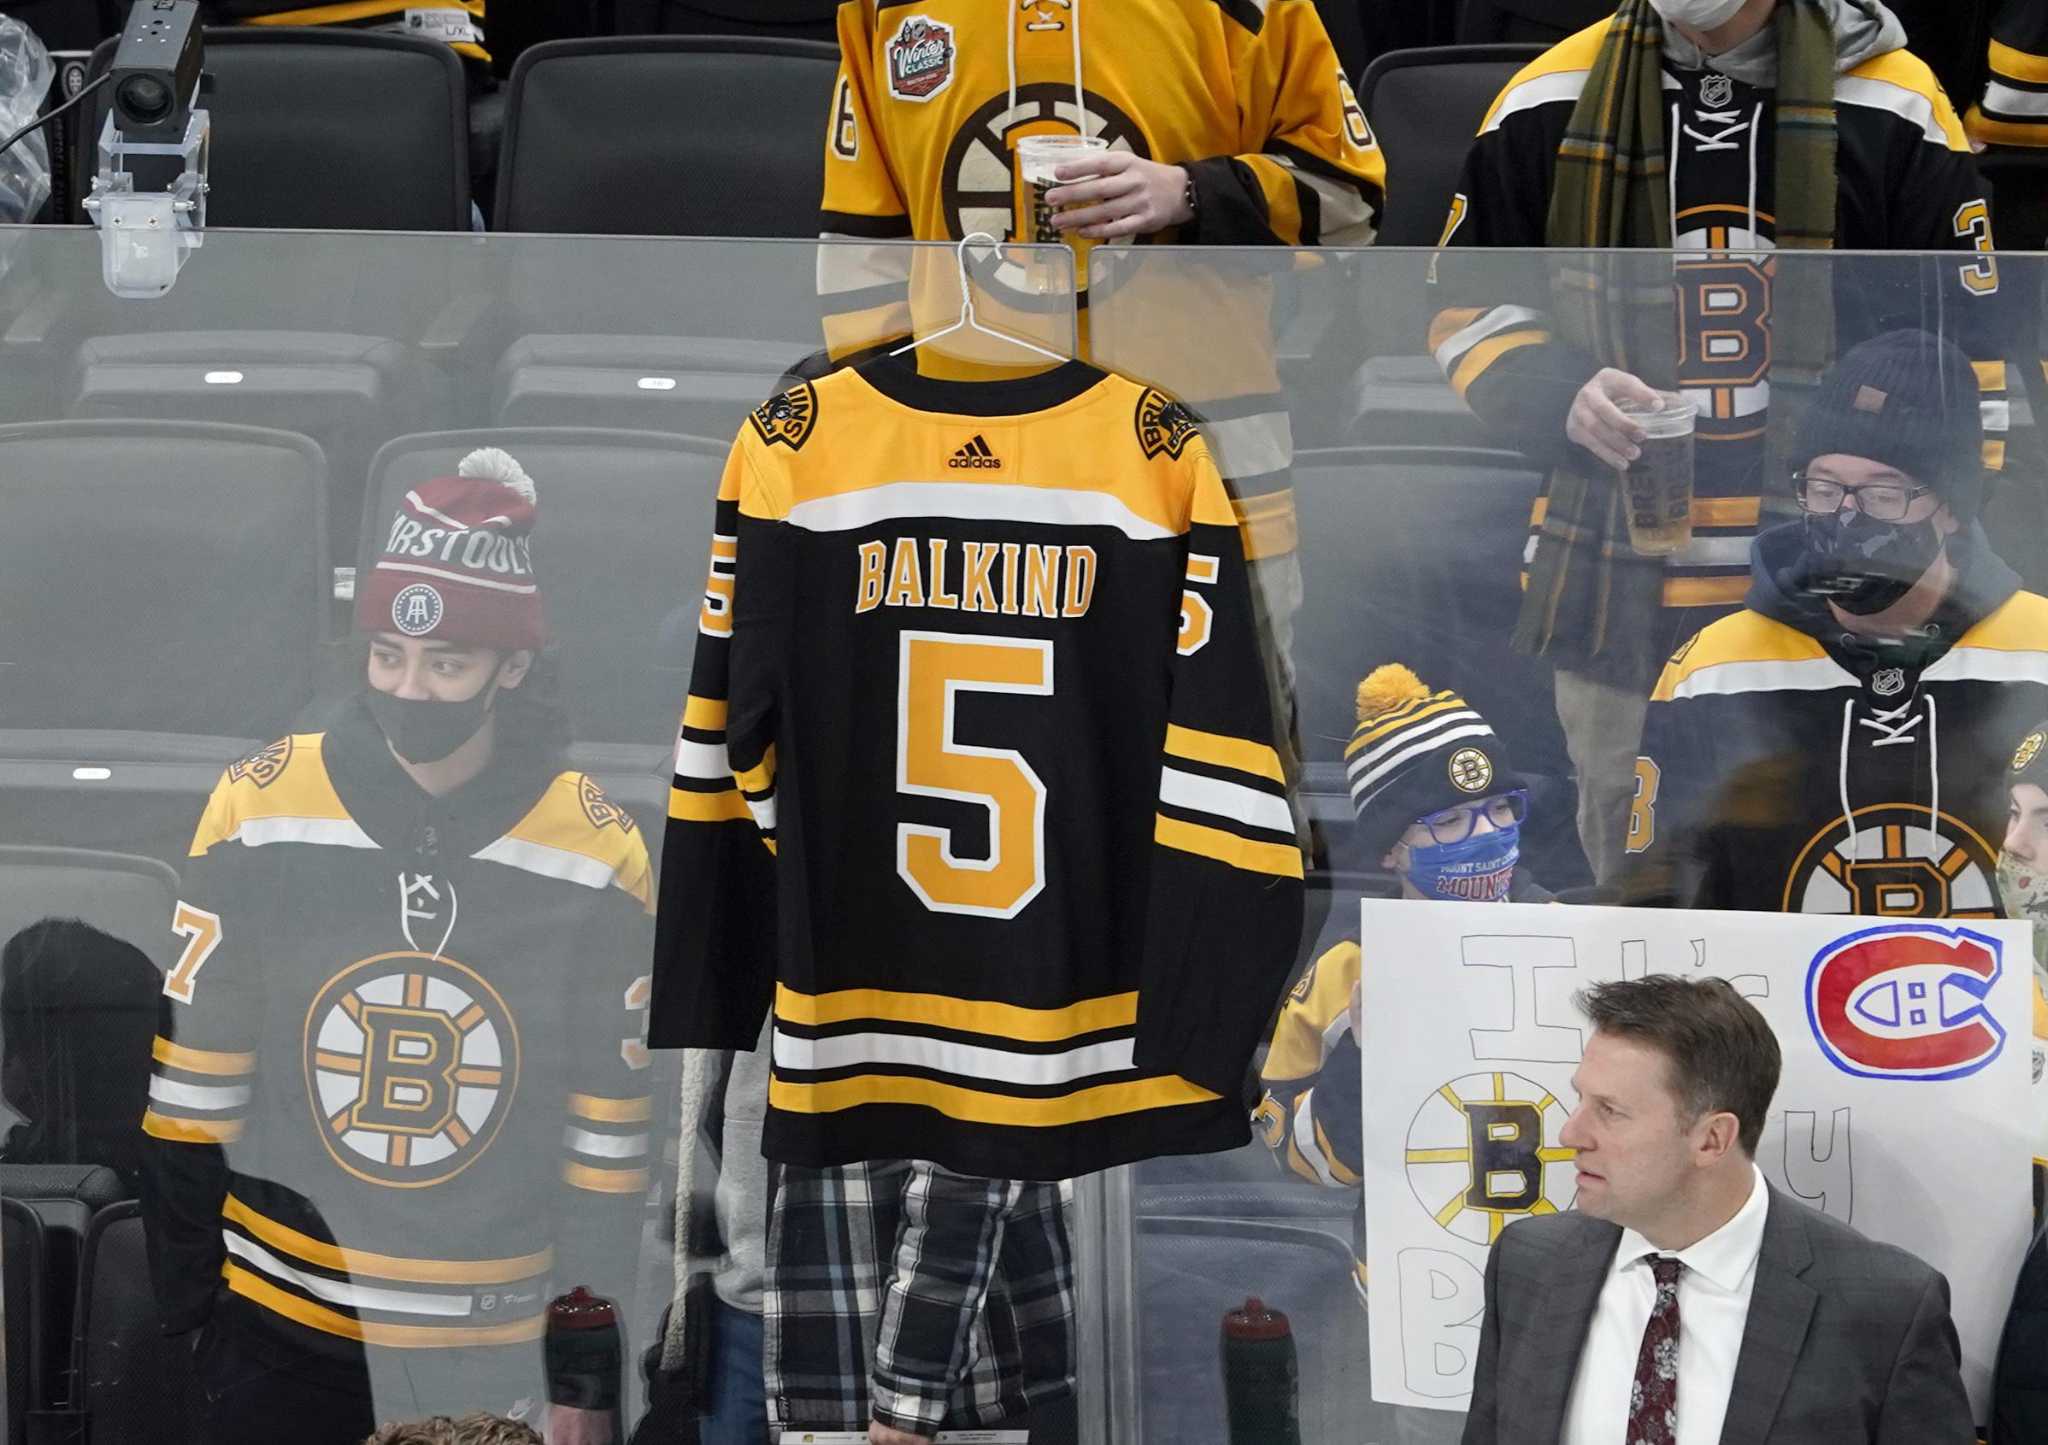 Haggerty: There's Something Special About These Boston Bruins